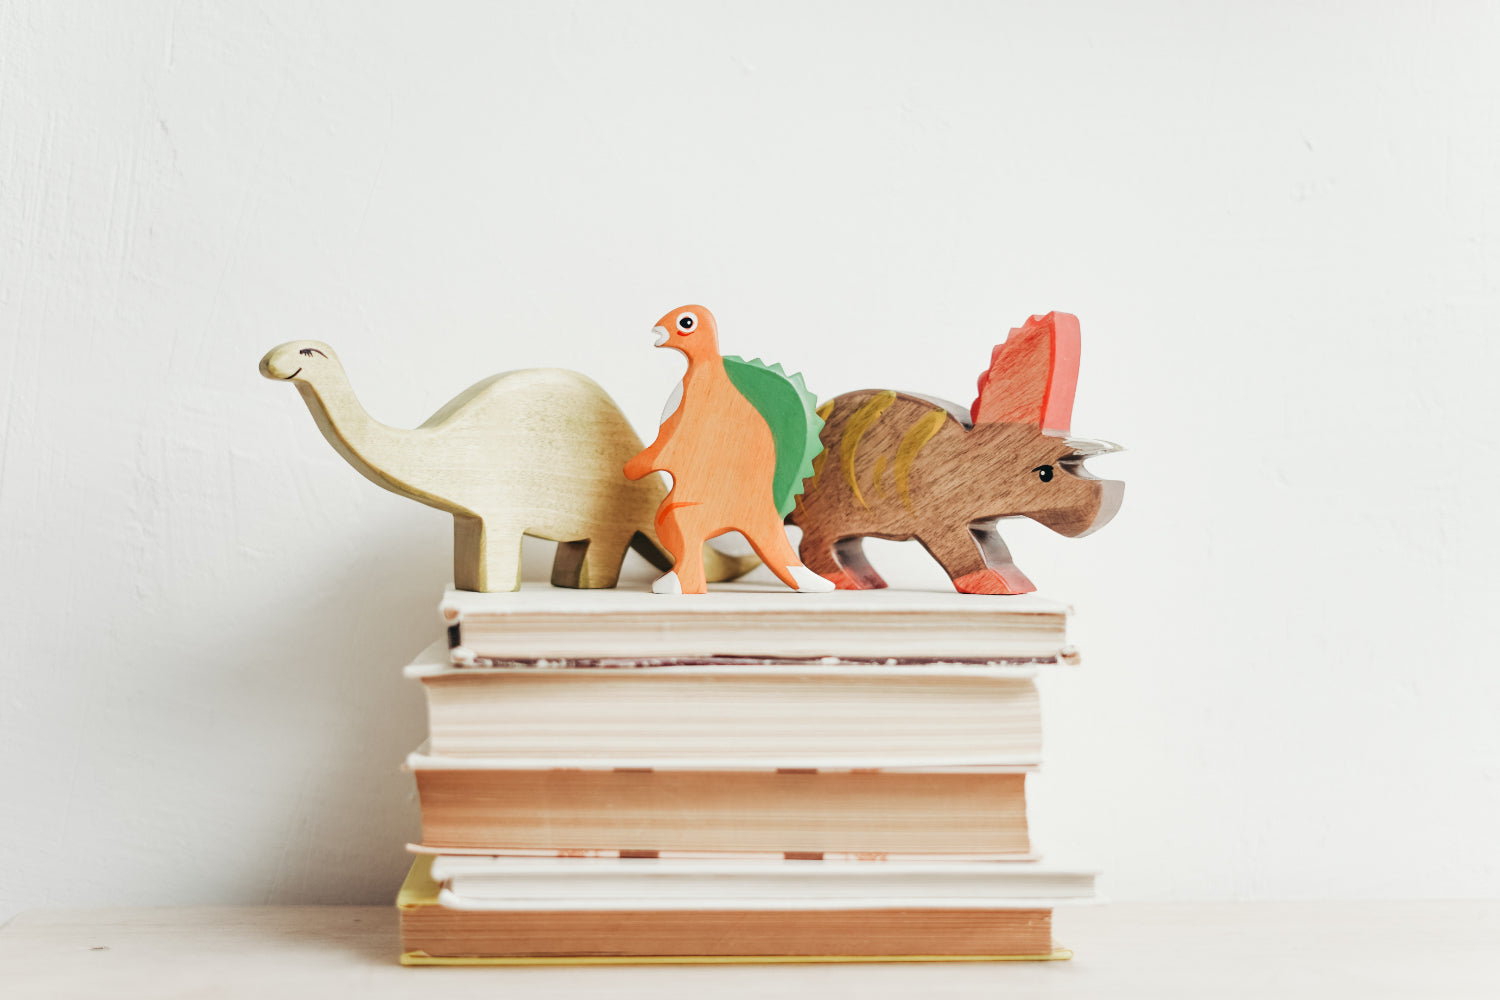 Stack of books topped with dinosaur toys